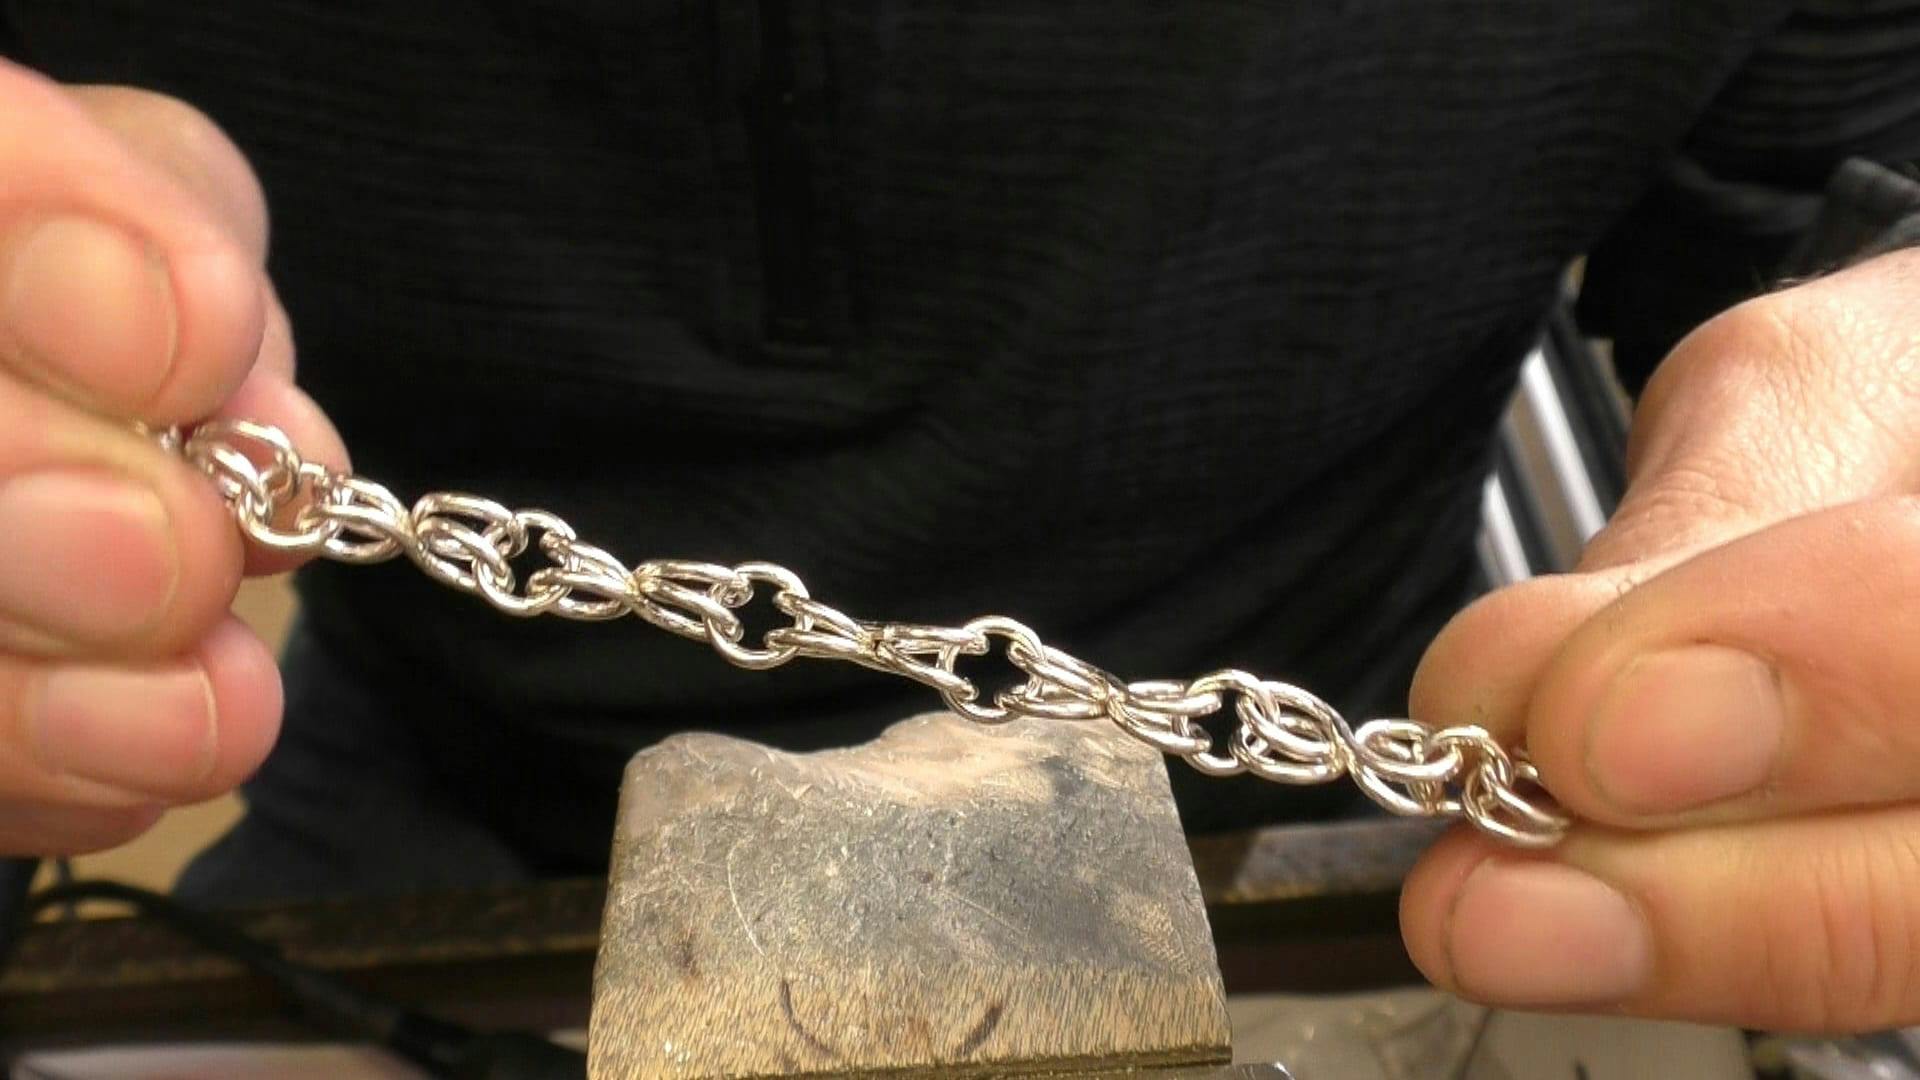 How to Make Figure 8 Link Chain